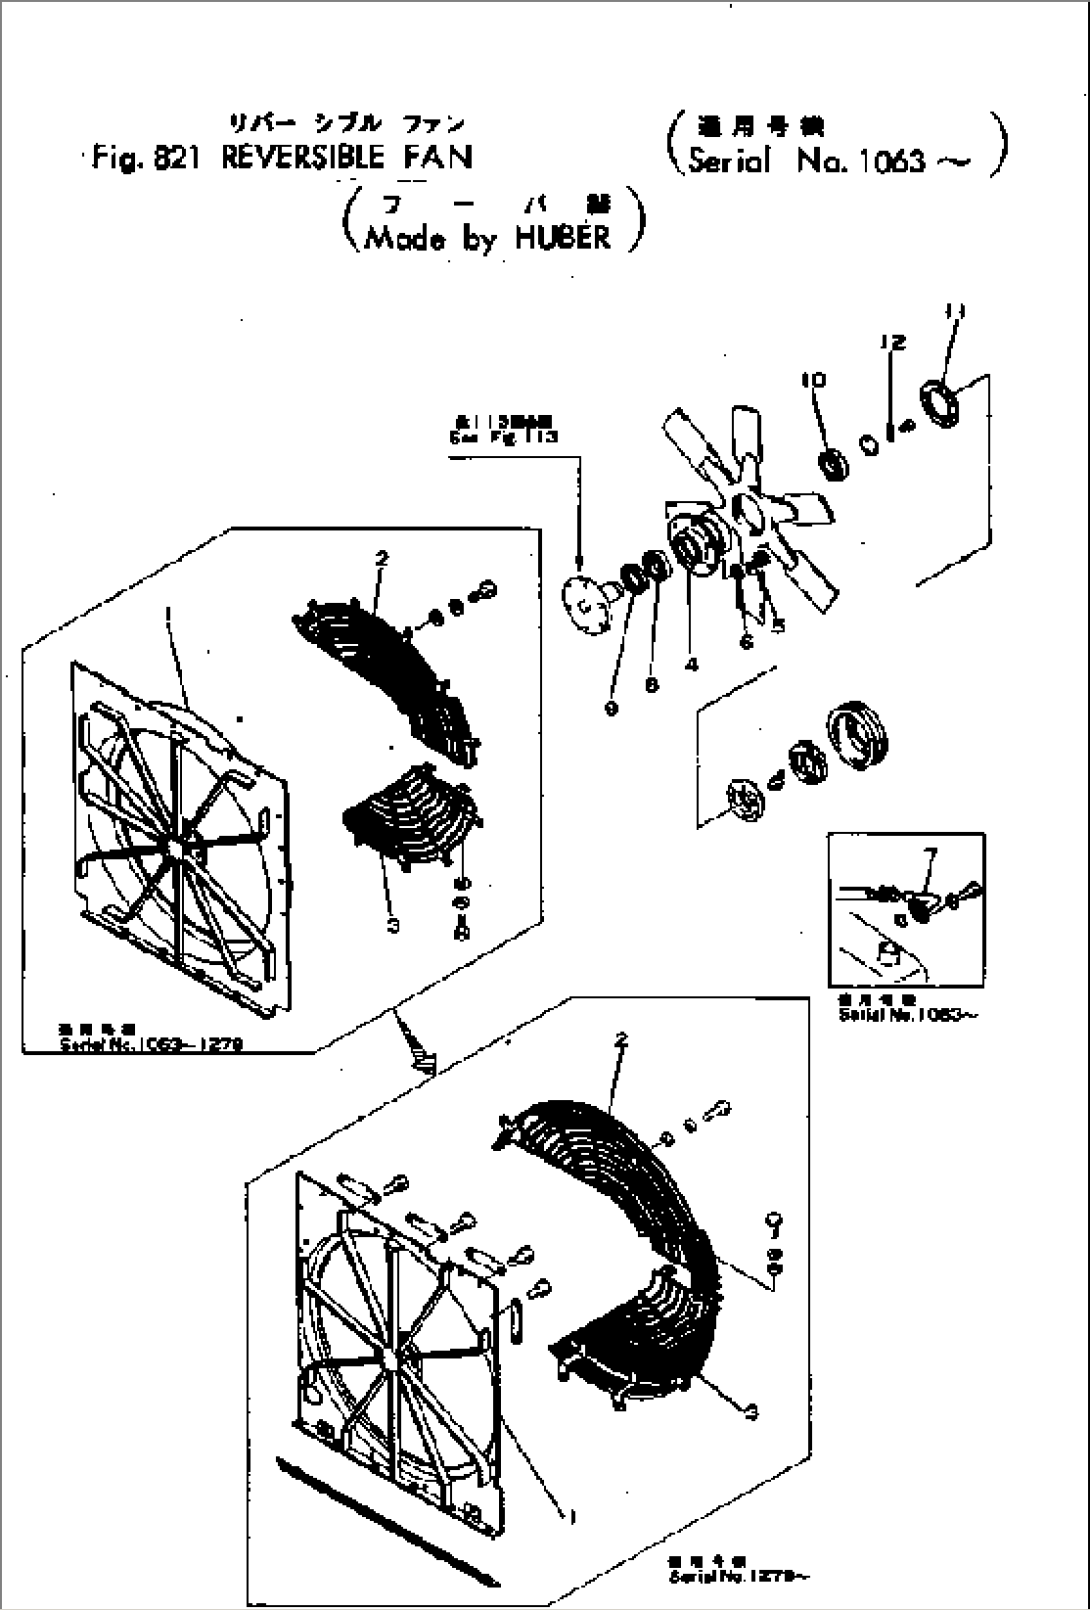 REVERSIBLE FAN (MADE BY HUBER) RELATED PARTS(#1063-)